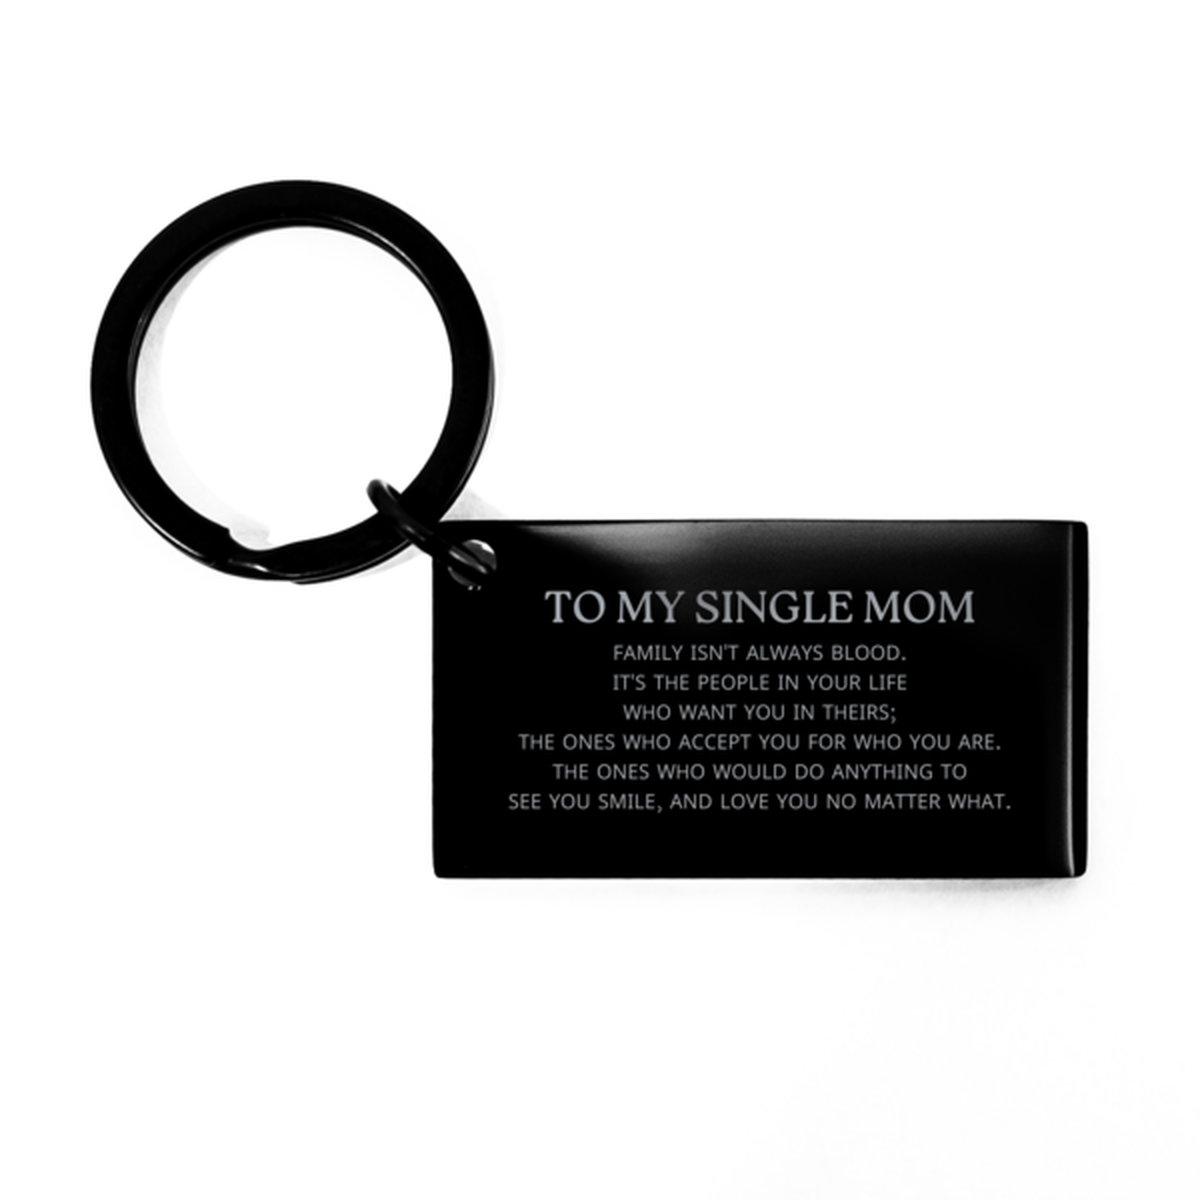 To My Single Mom Gifts, Family isn't always blood, Single Mom Keychain, Birthday Christmas Unique Present For Single Mom